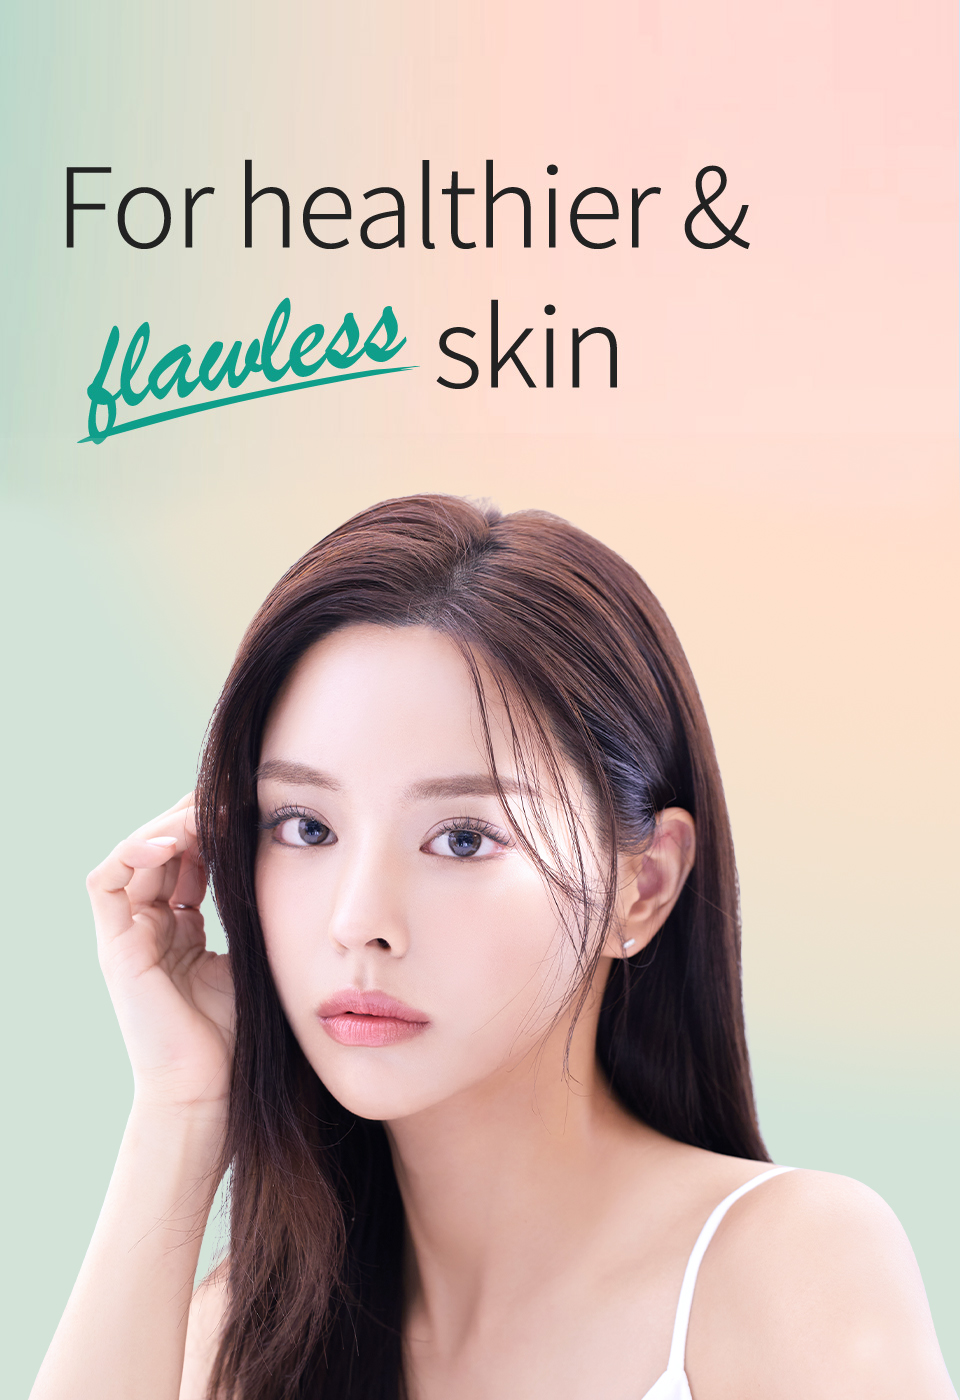 For healthier & flawless skin